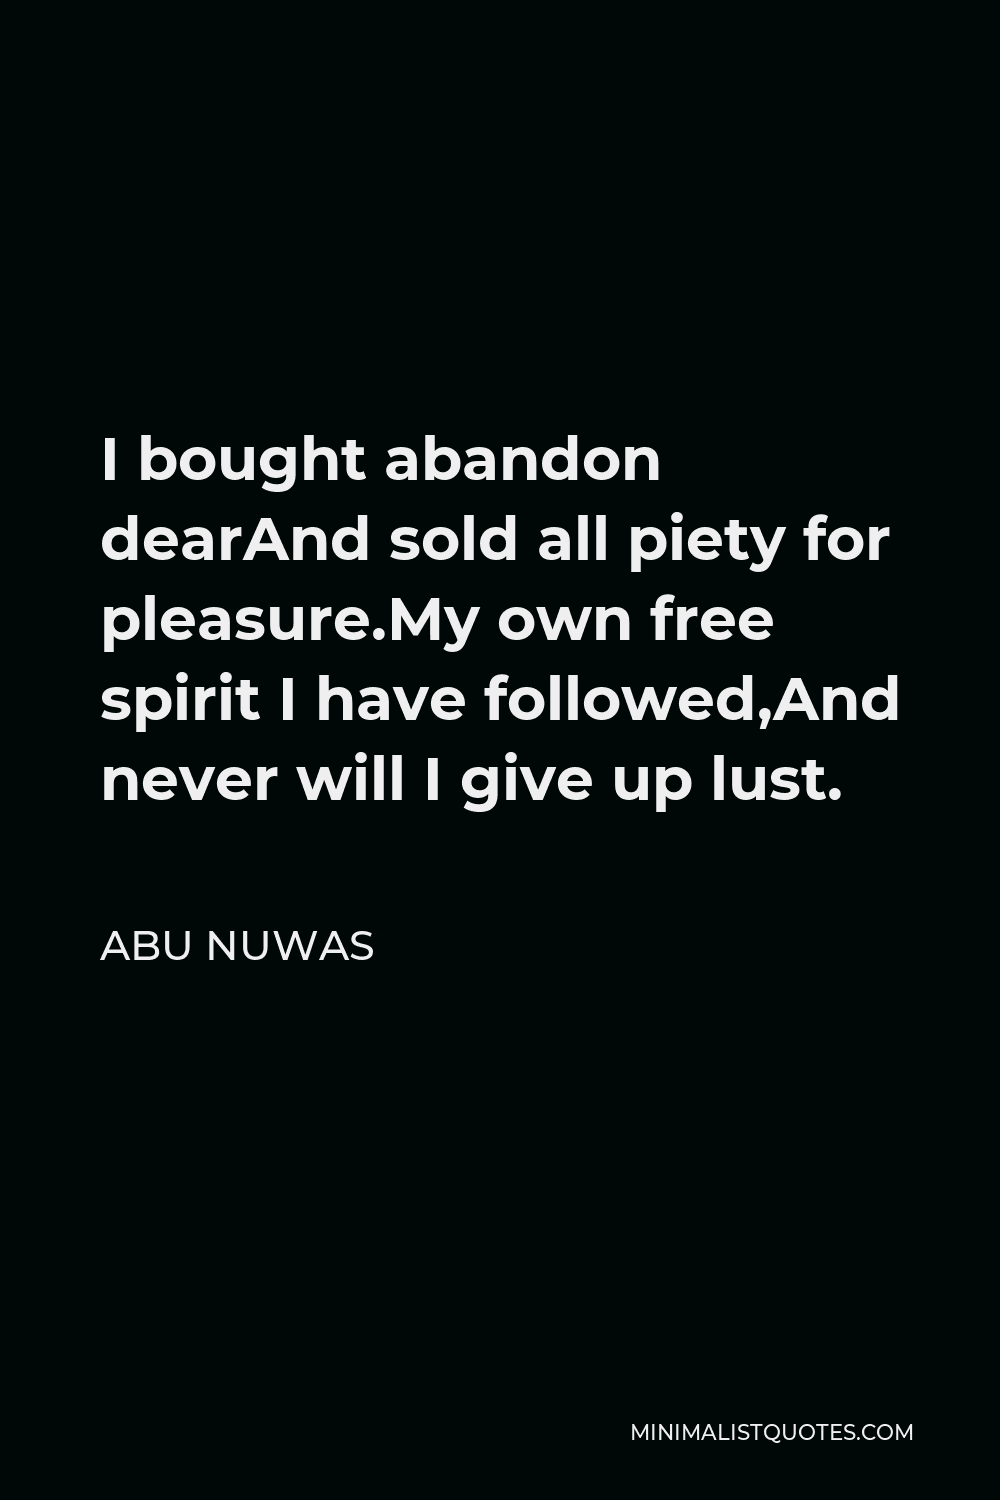 Abu Nuwas Quote - I bought abandon dearAnd sold all piety for pleasure.My own free spirit I have followed,And never will I give up lust.